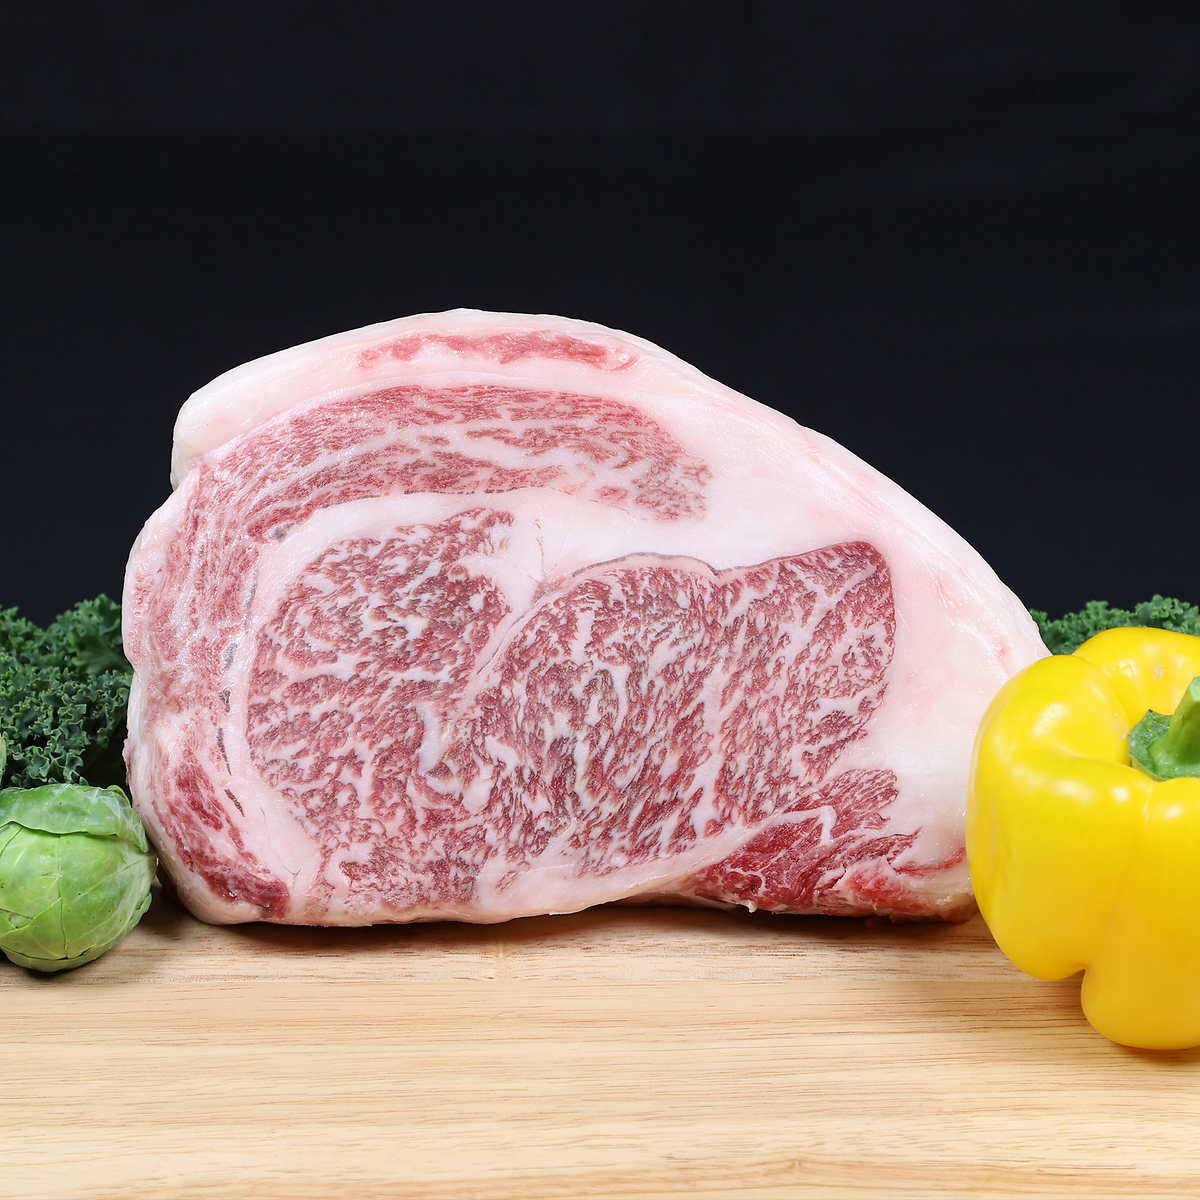 How Much Does Wagyu Beef Cost In Japan